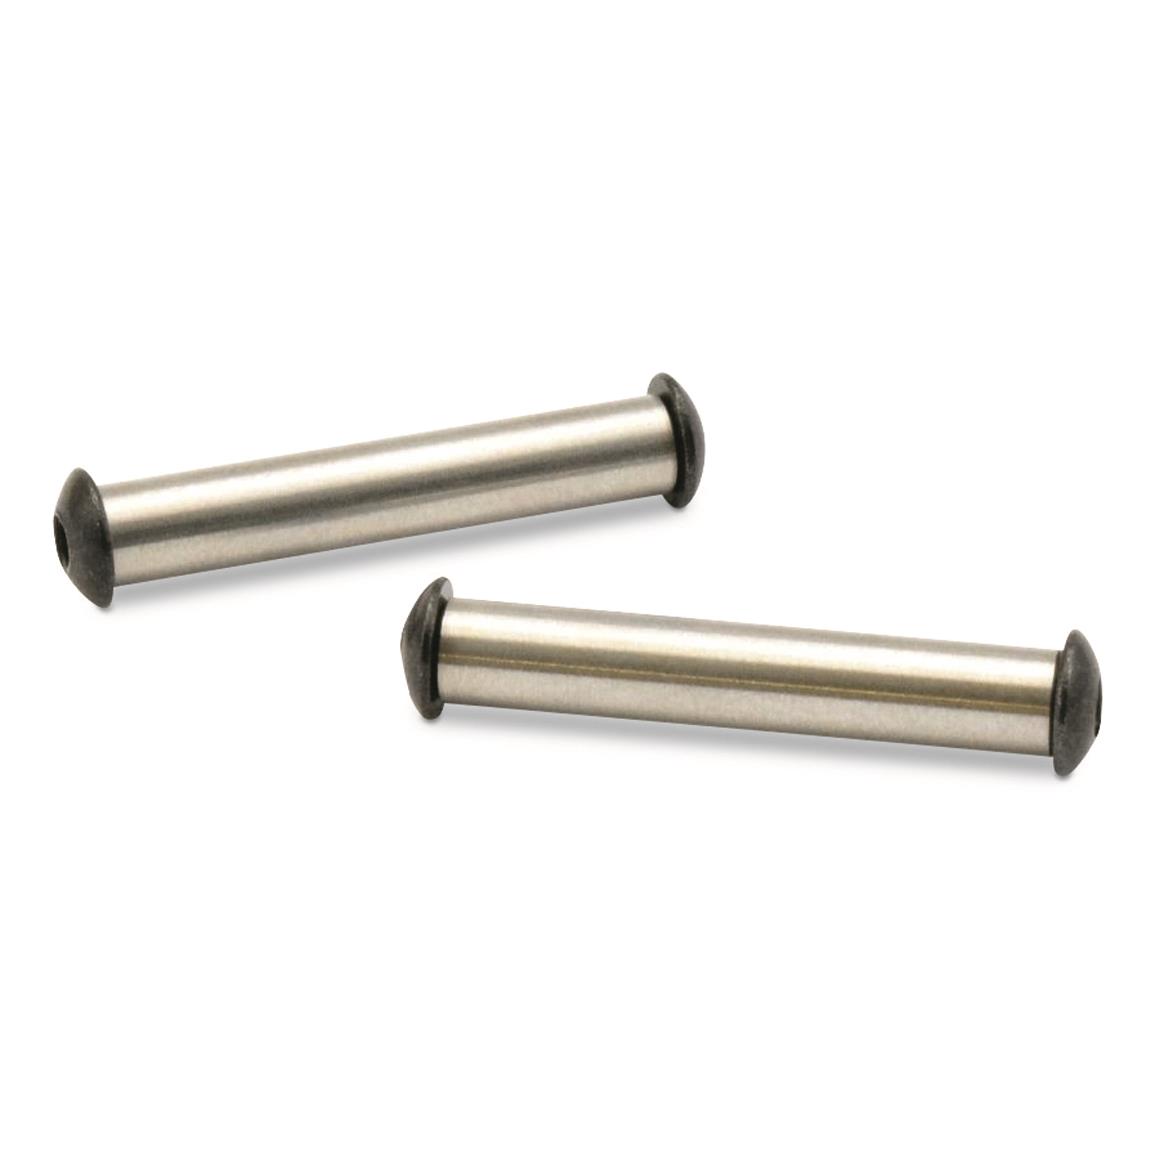 Armasepc Stainless Steel Anti-Walk Trigger/Hammer Pins